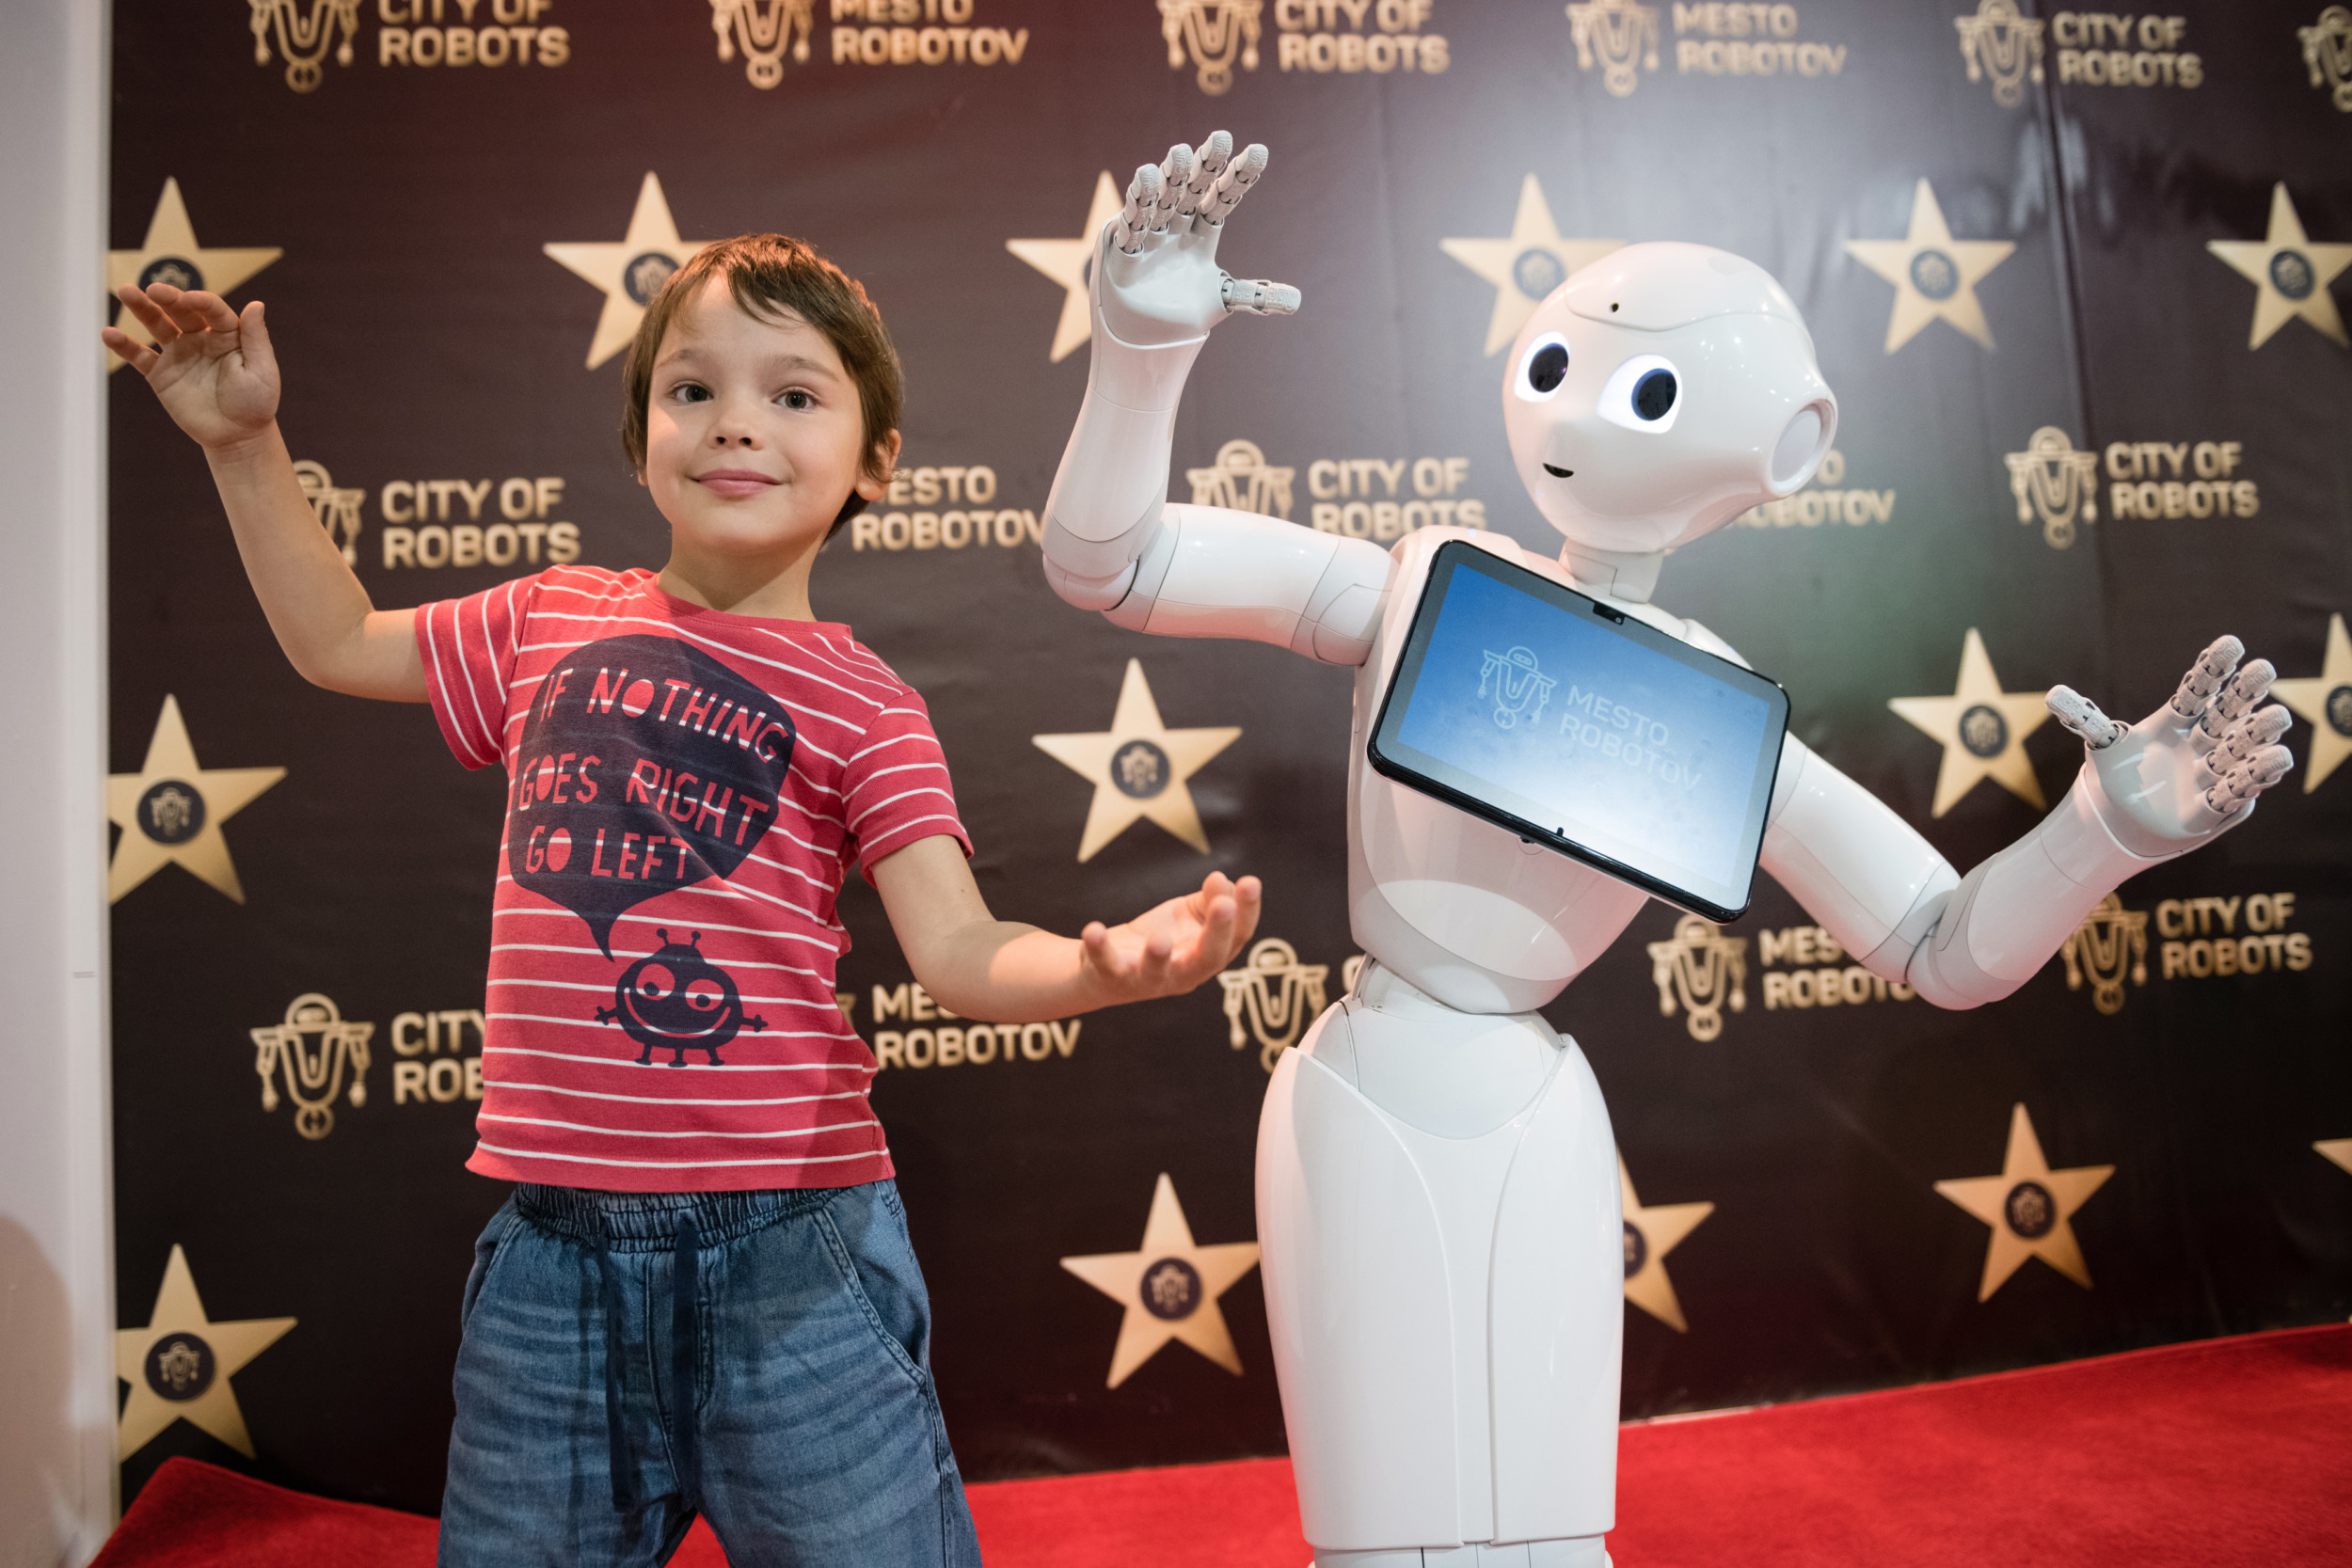 AI robots in school: Young boy in jeans and red t-shirt stands with arms outstretched to sides and leaning to his left, while white, humanoid, child-sized robot to child's left mimics the pose perfectly.